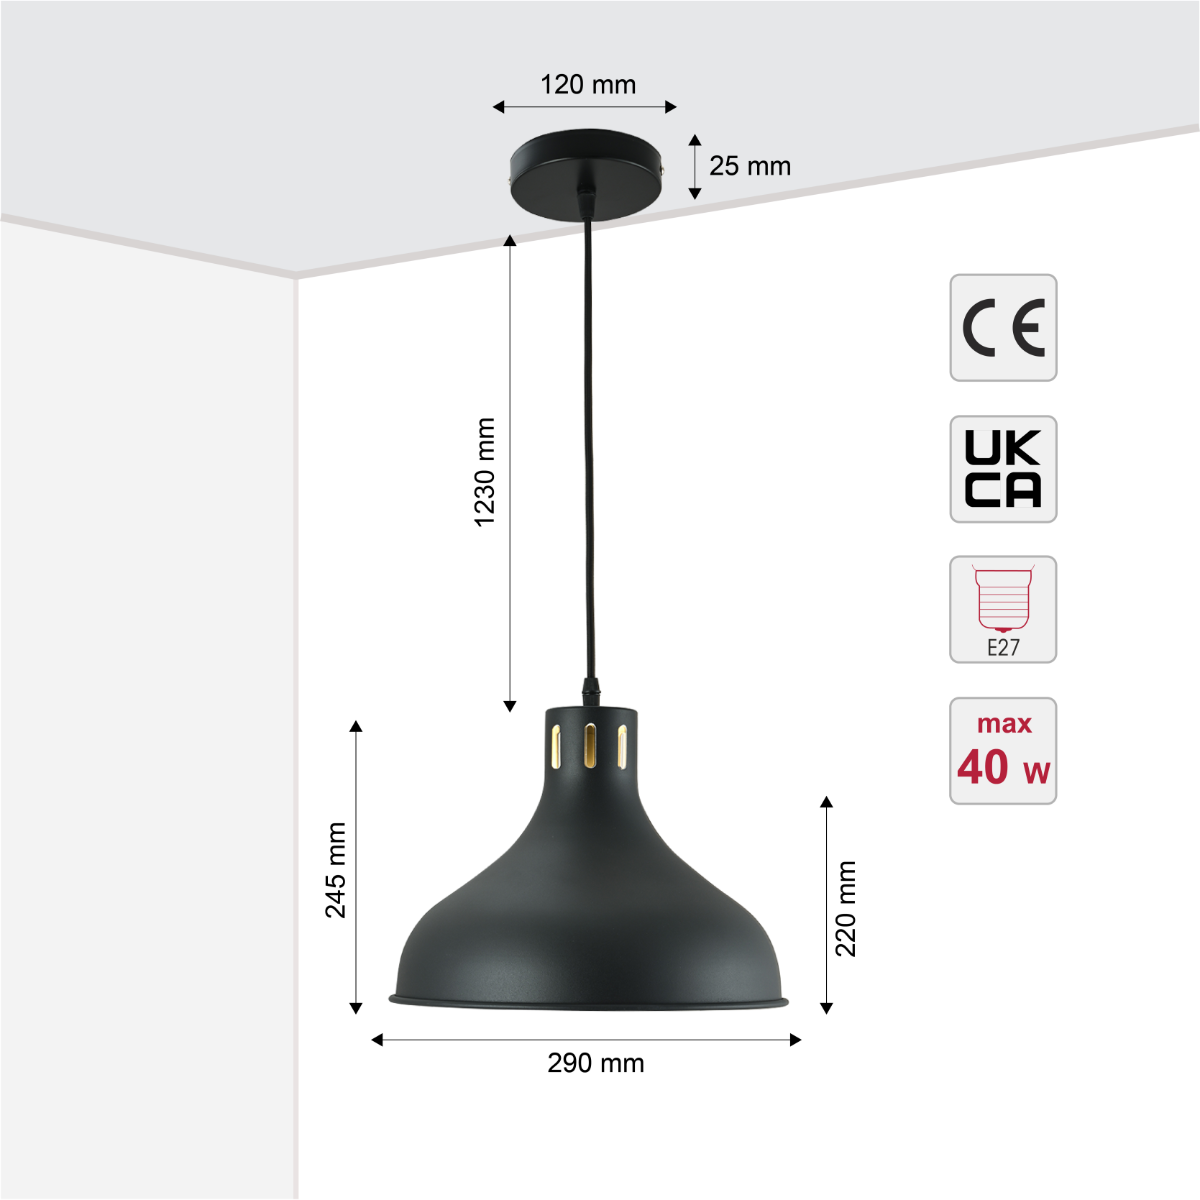 Size and certifications of Artisan Onion Dome Pendant Light 150-18438